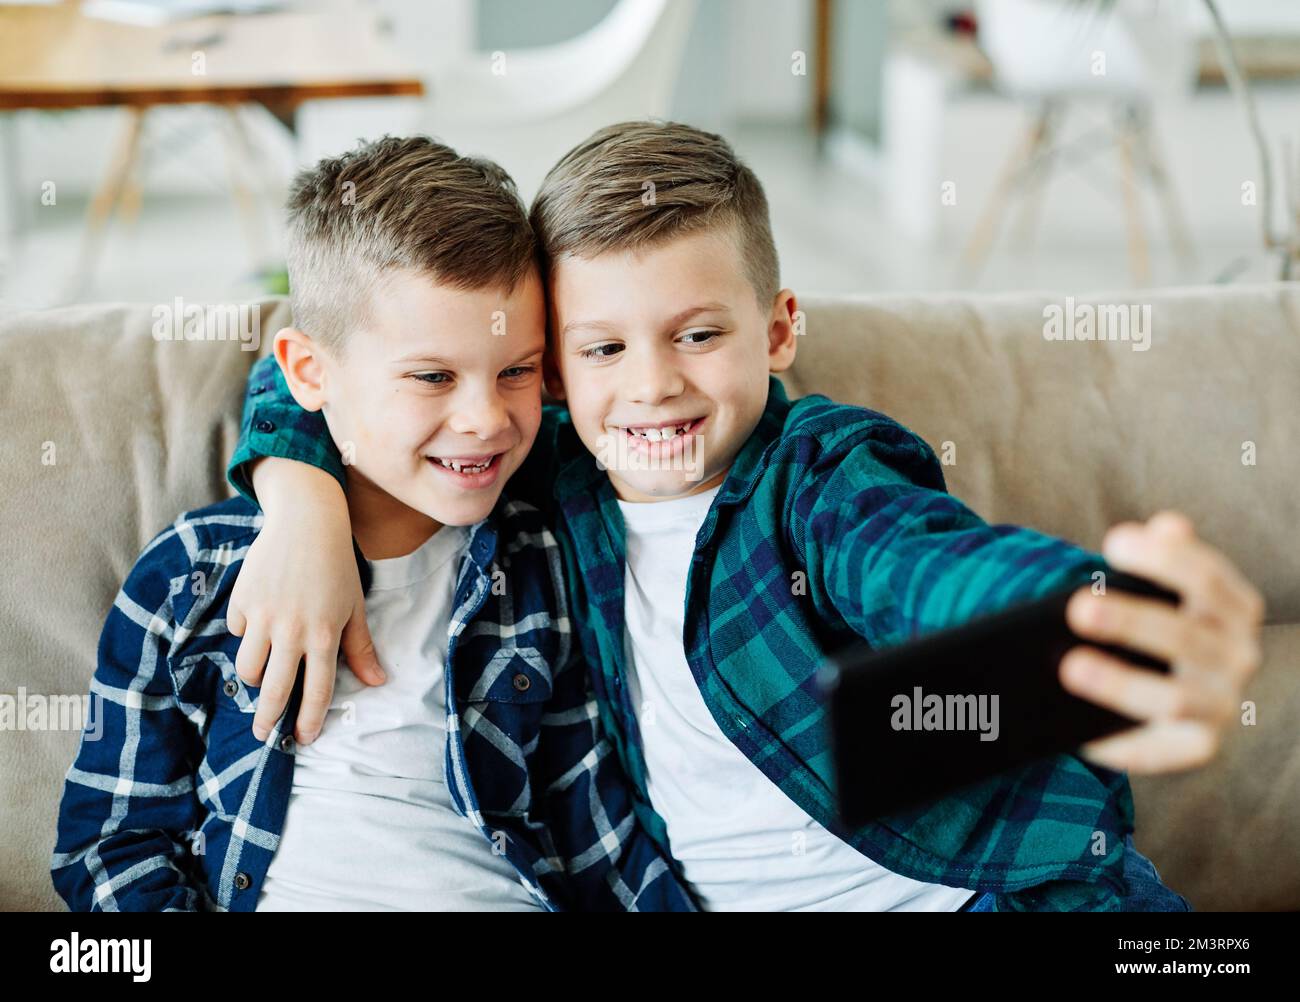 child brother friend having fun taking selfie mobile phone technology smartphone happy kid Stock Photo